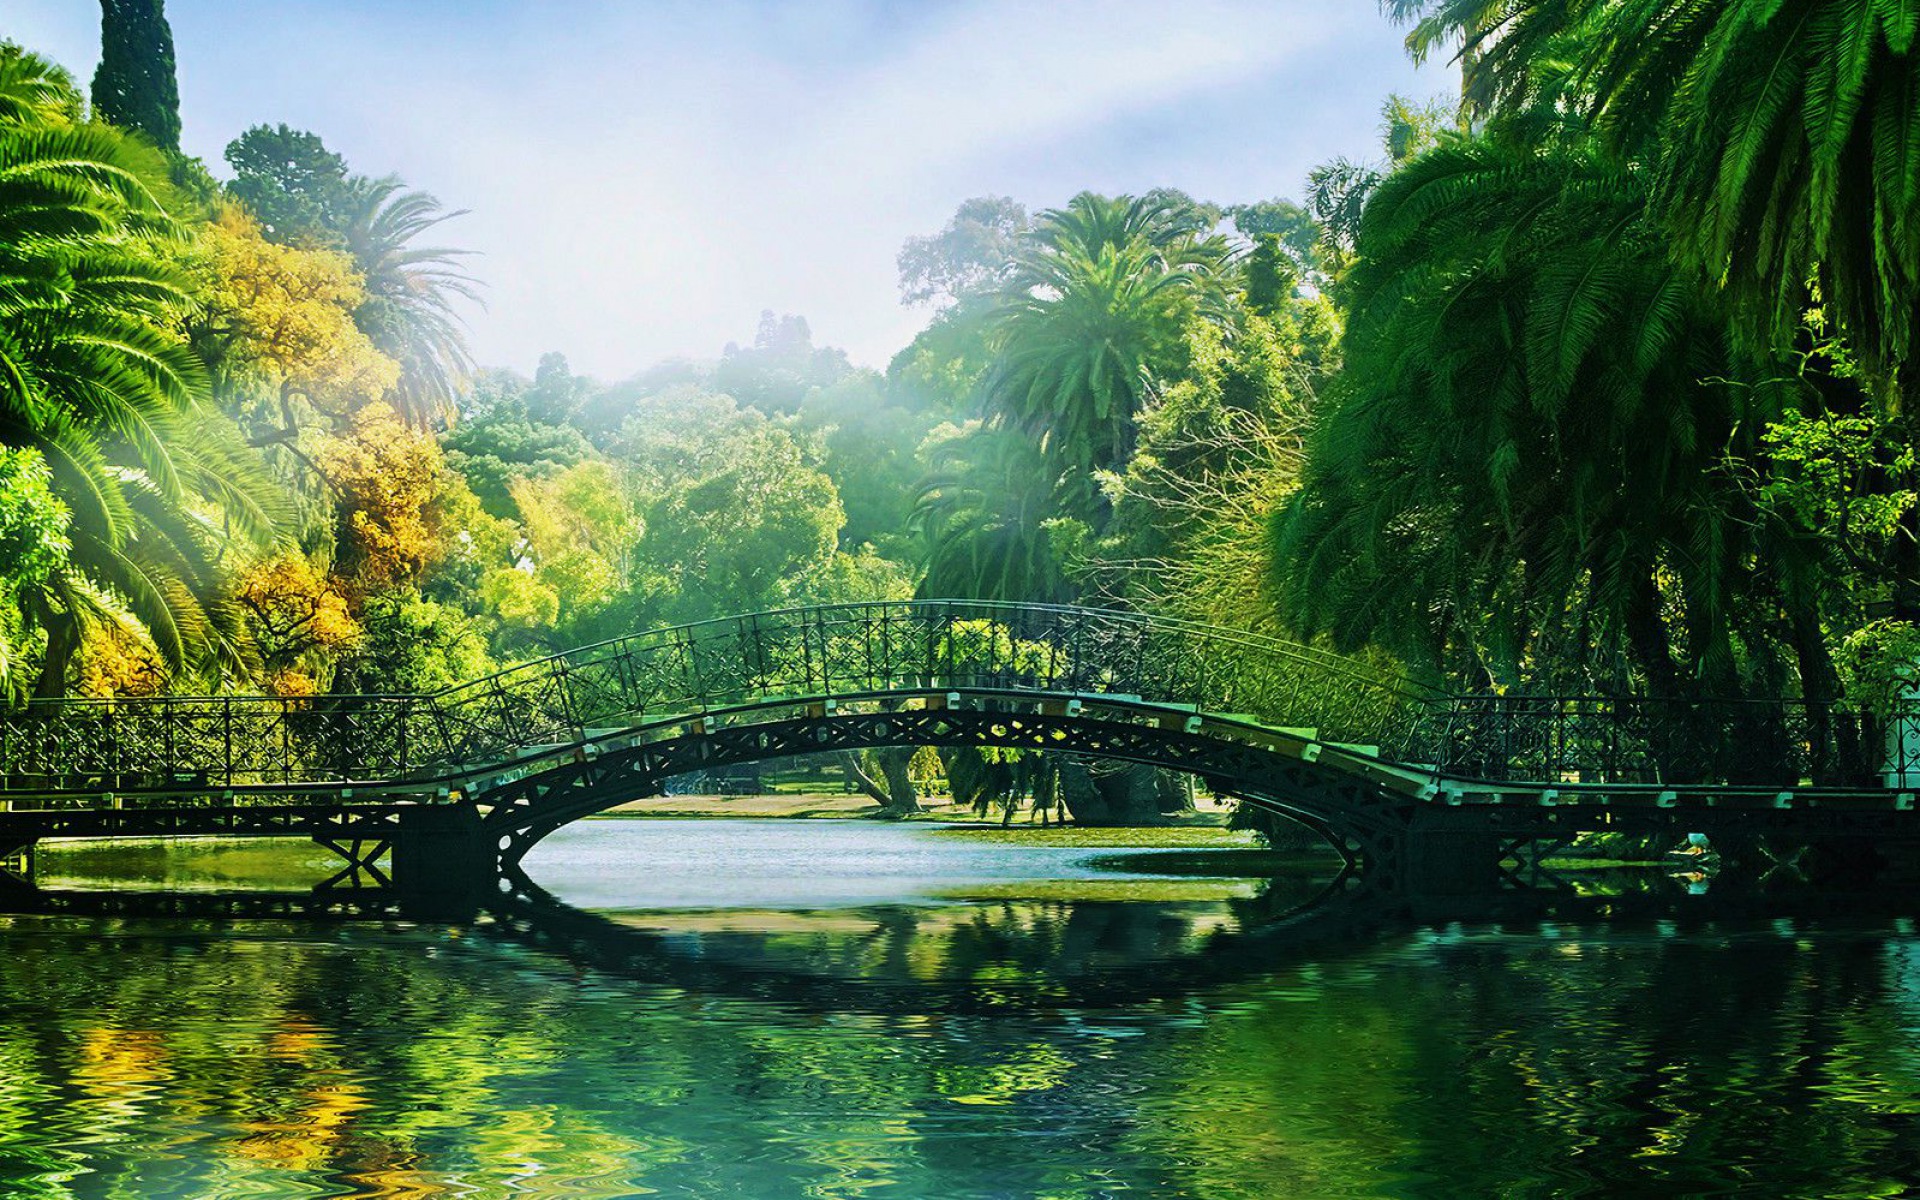 Tropical Park Sunny Day wallpapers | Tropical Park Sunny Day stock ...